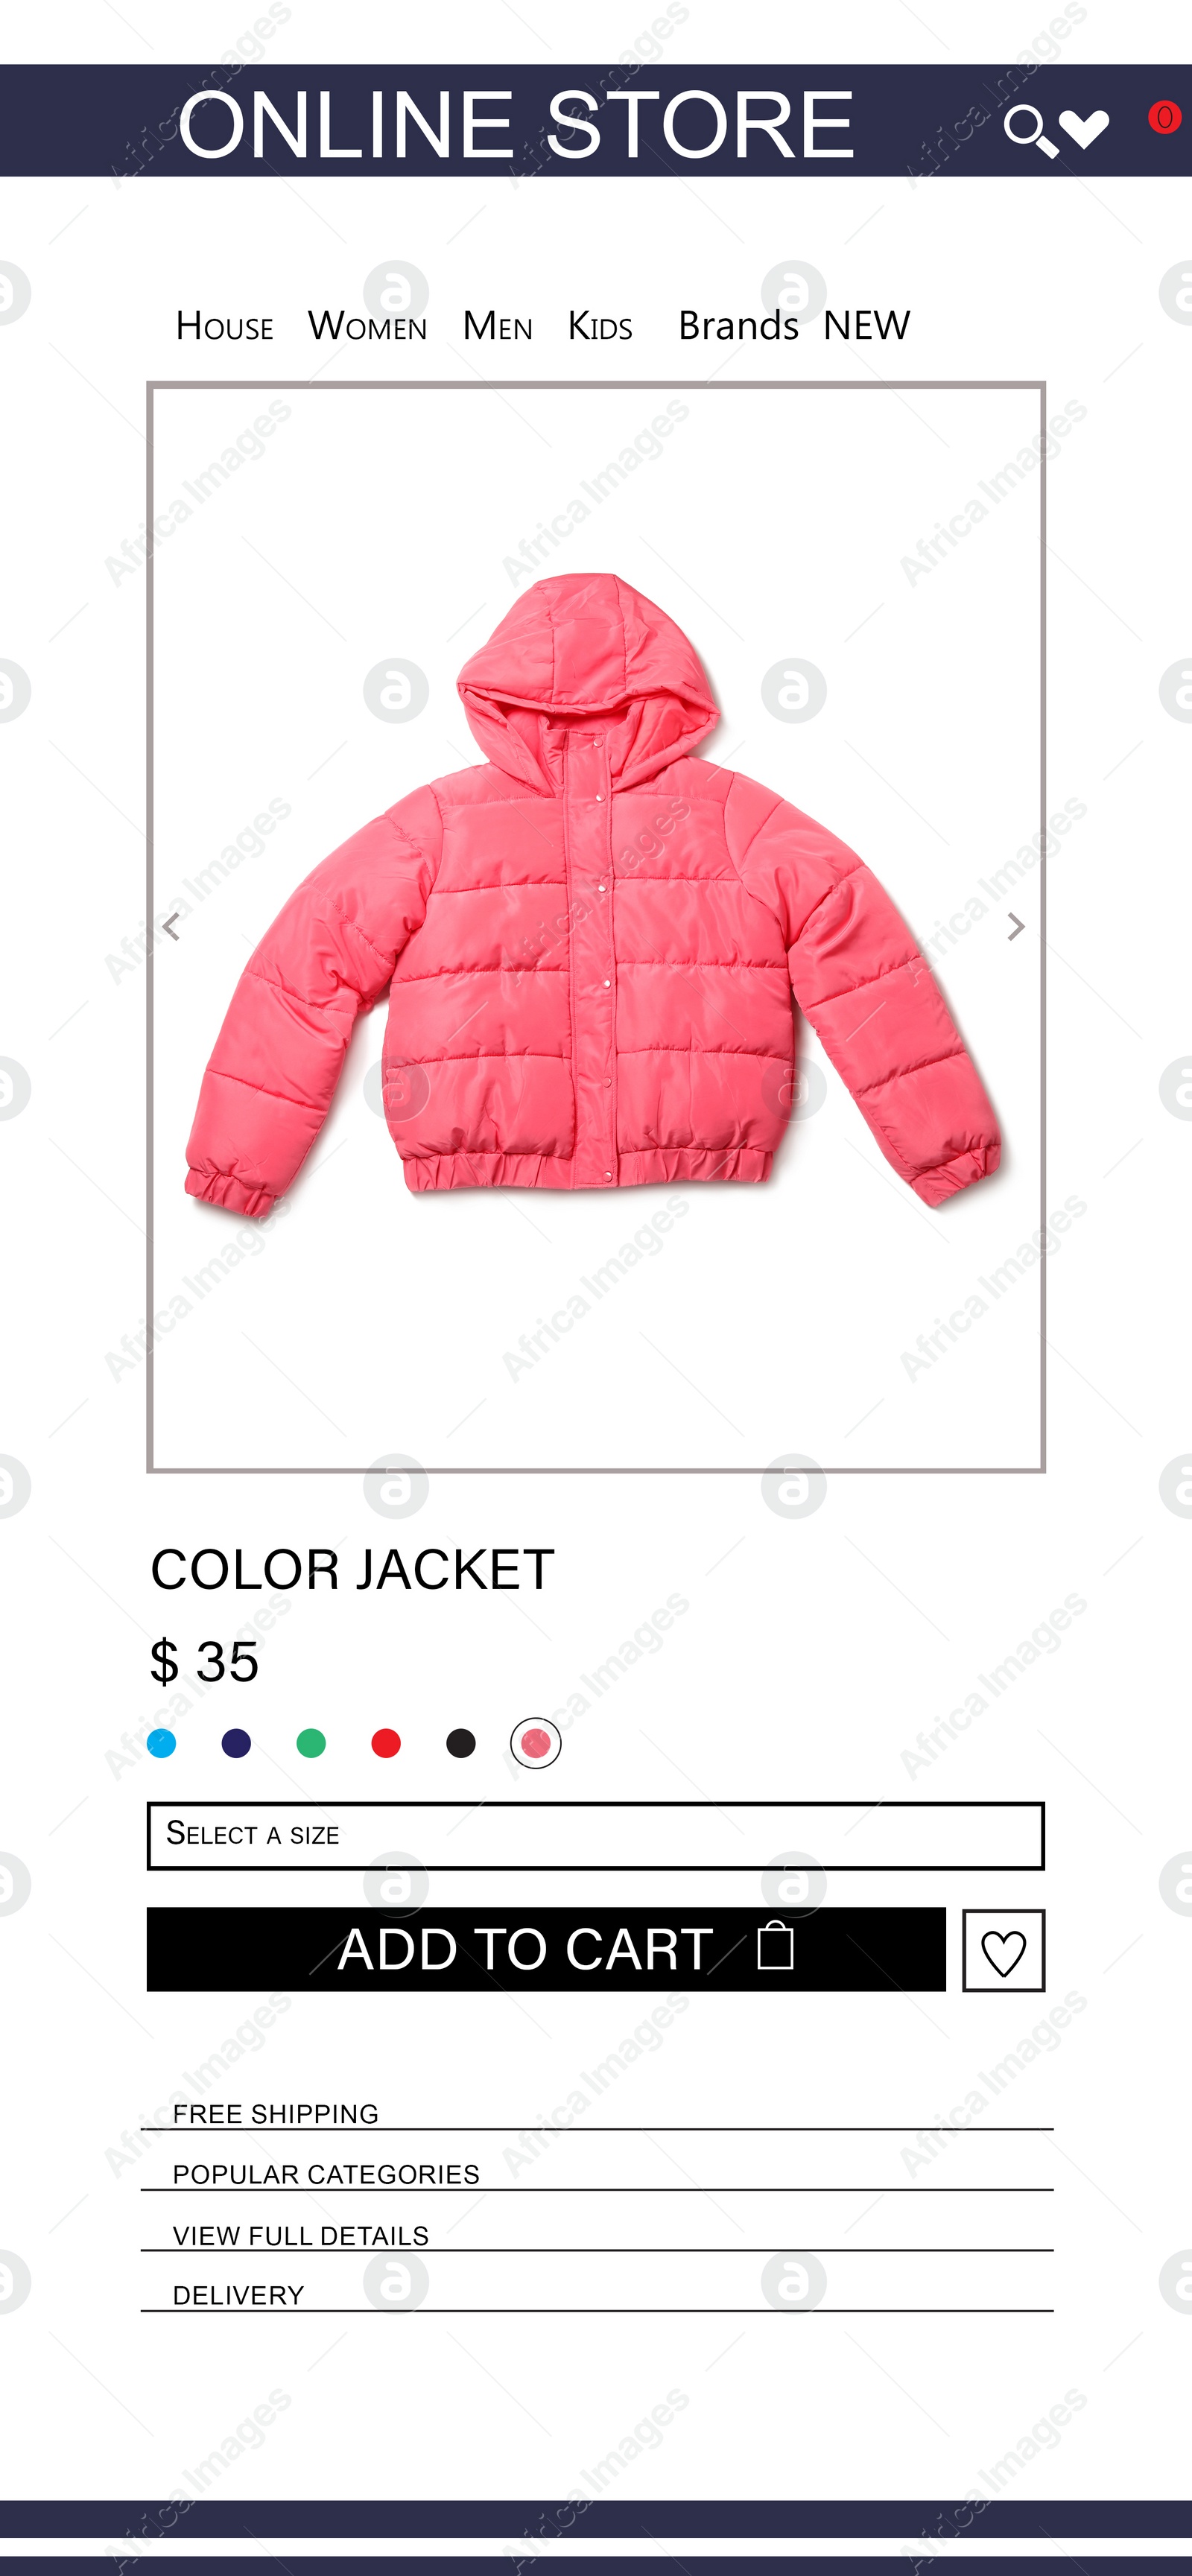 Image of Online store website page with jacket and information. Image can be pasted onto smartphone screen